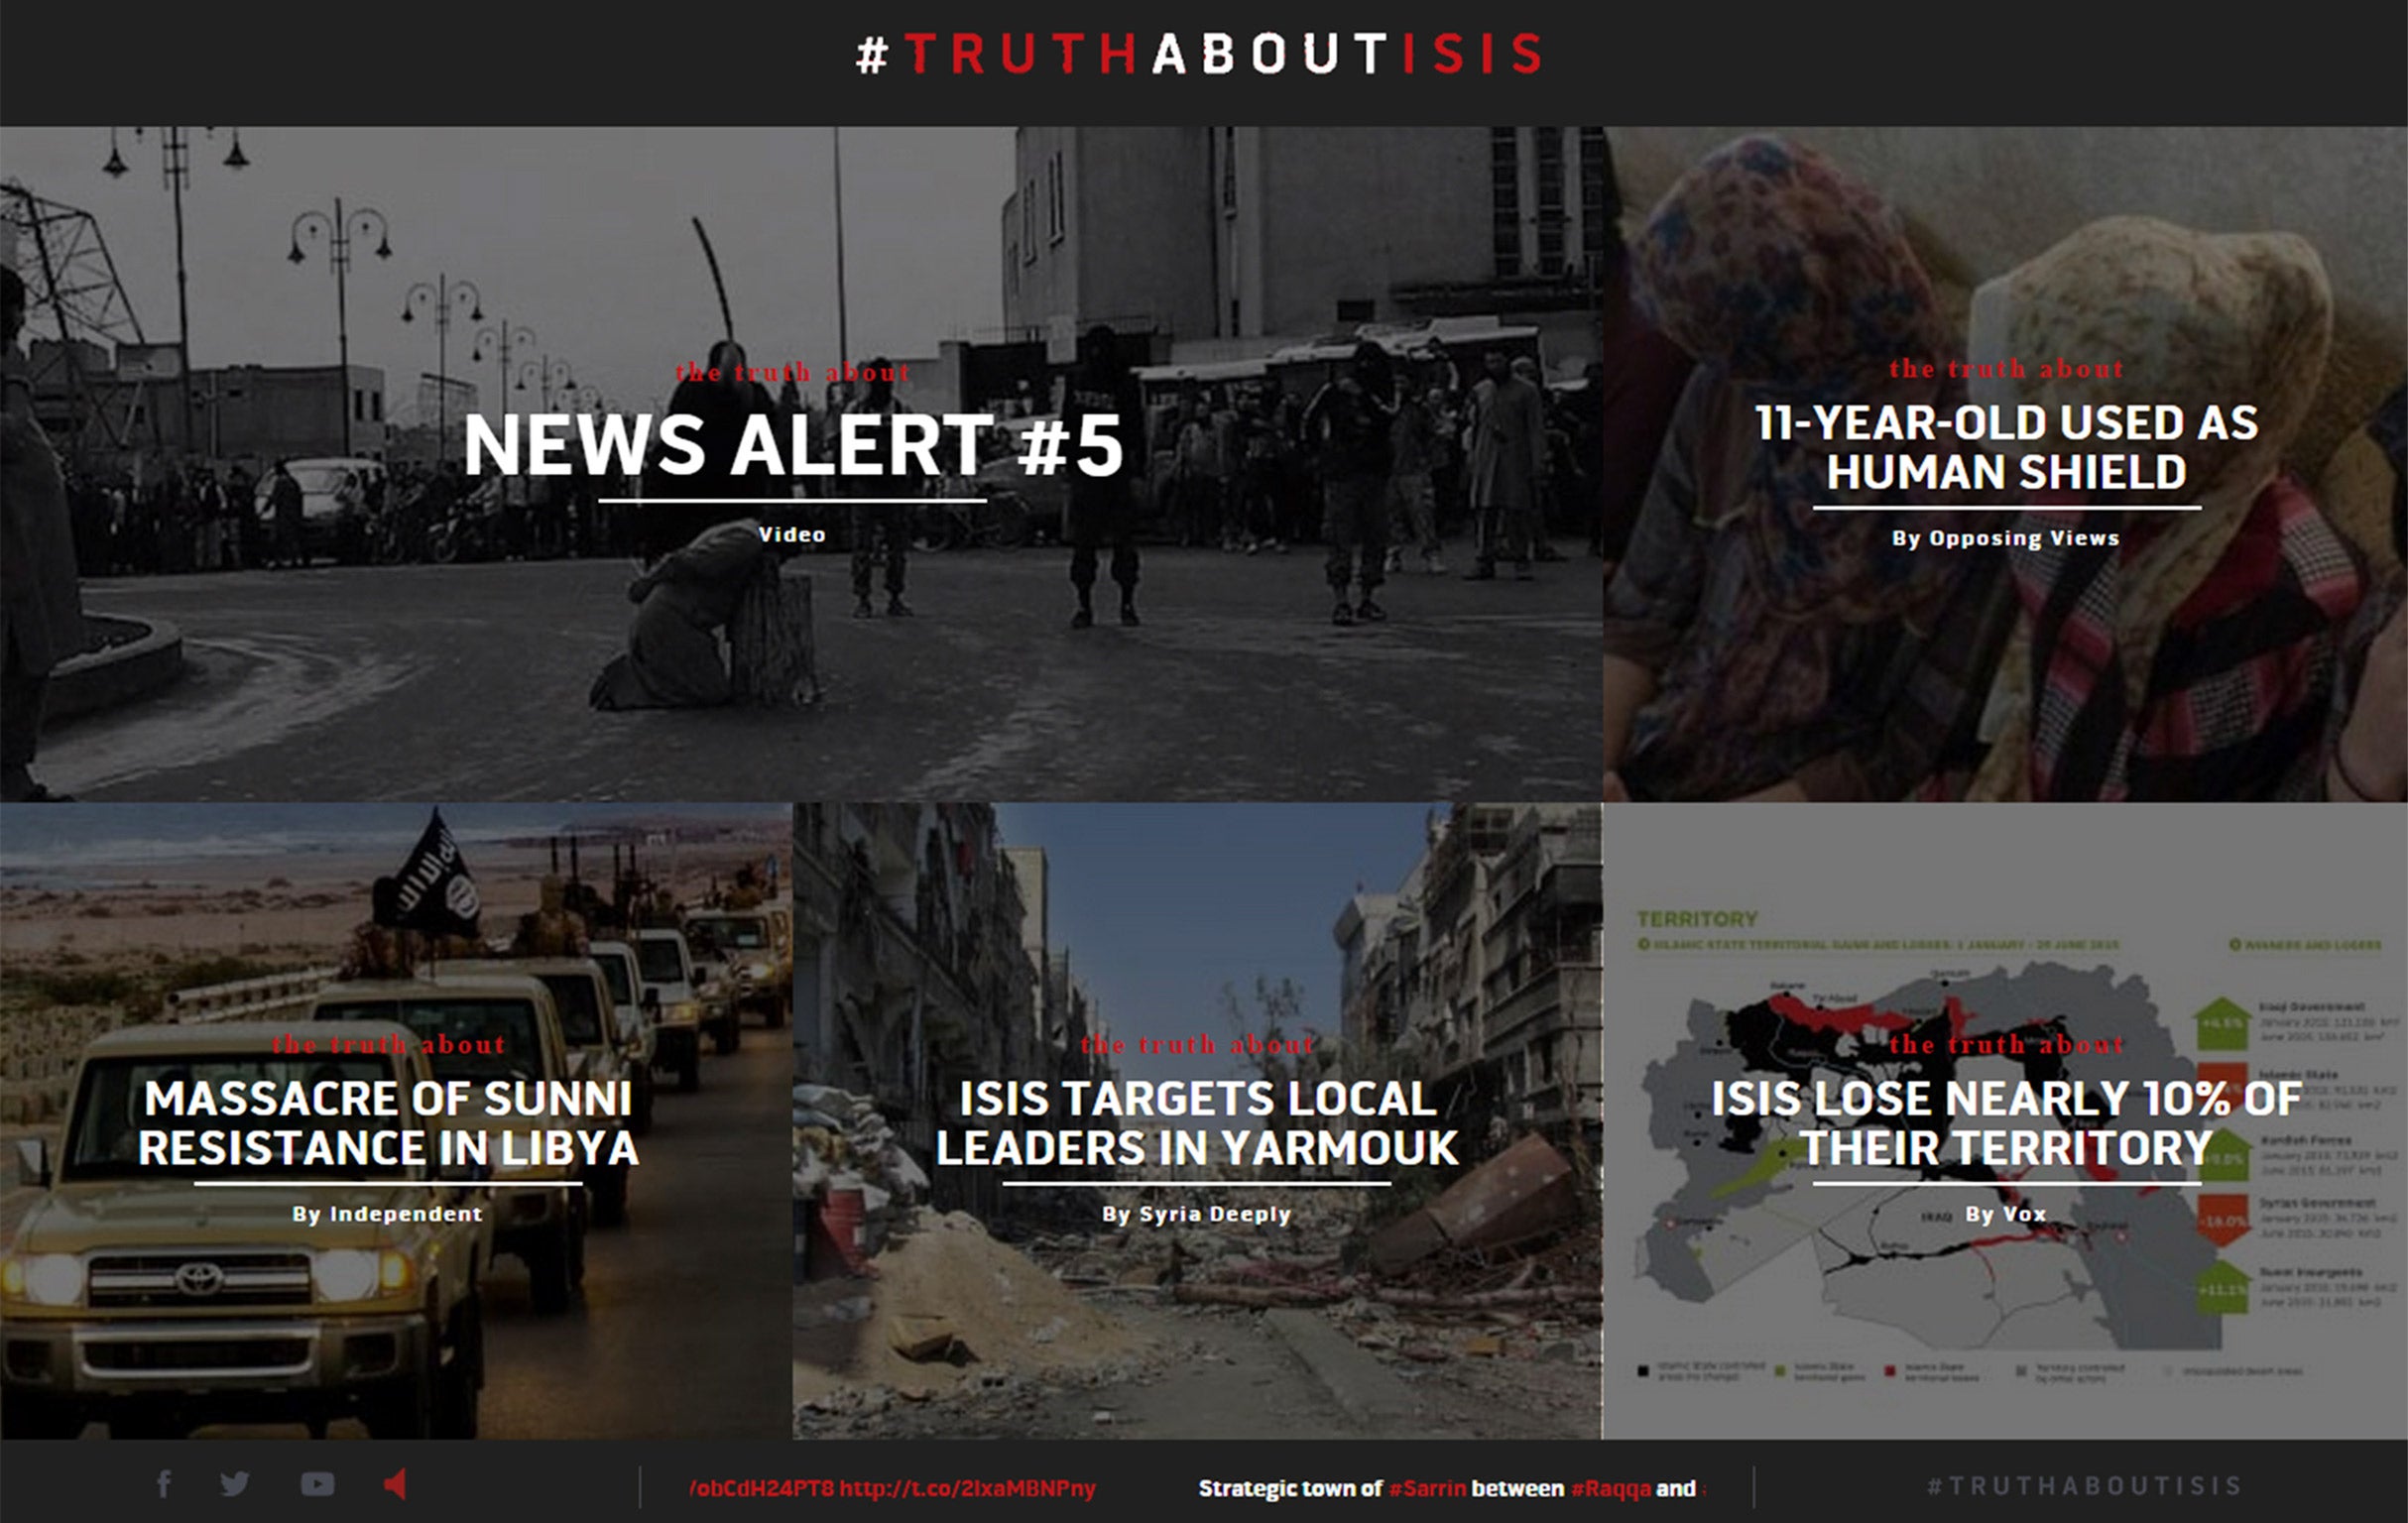 The website attempts to highlight the brutality of the regime